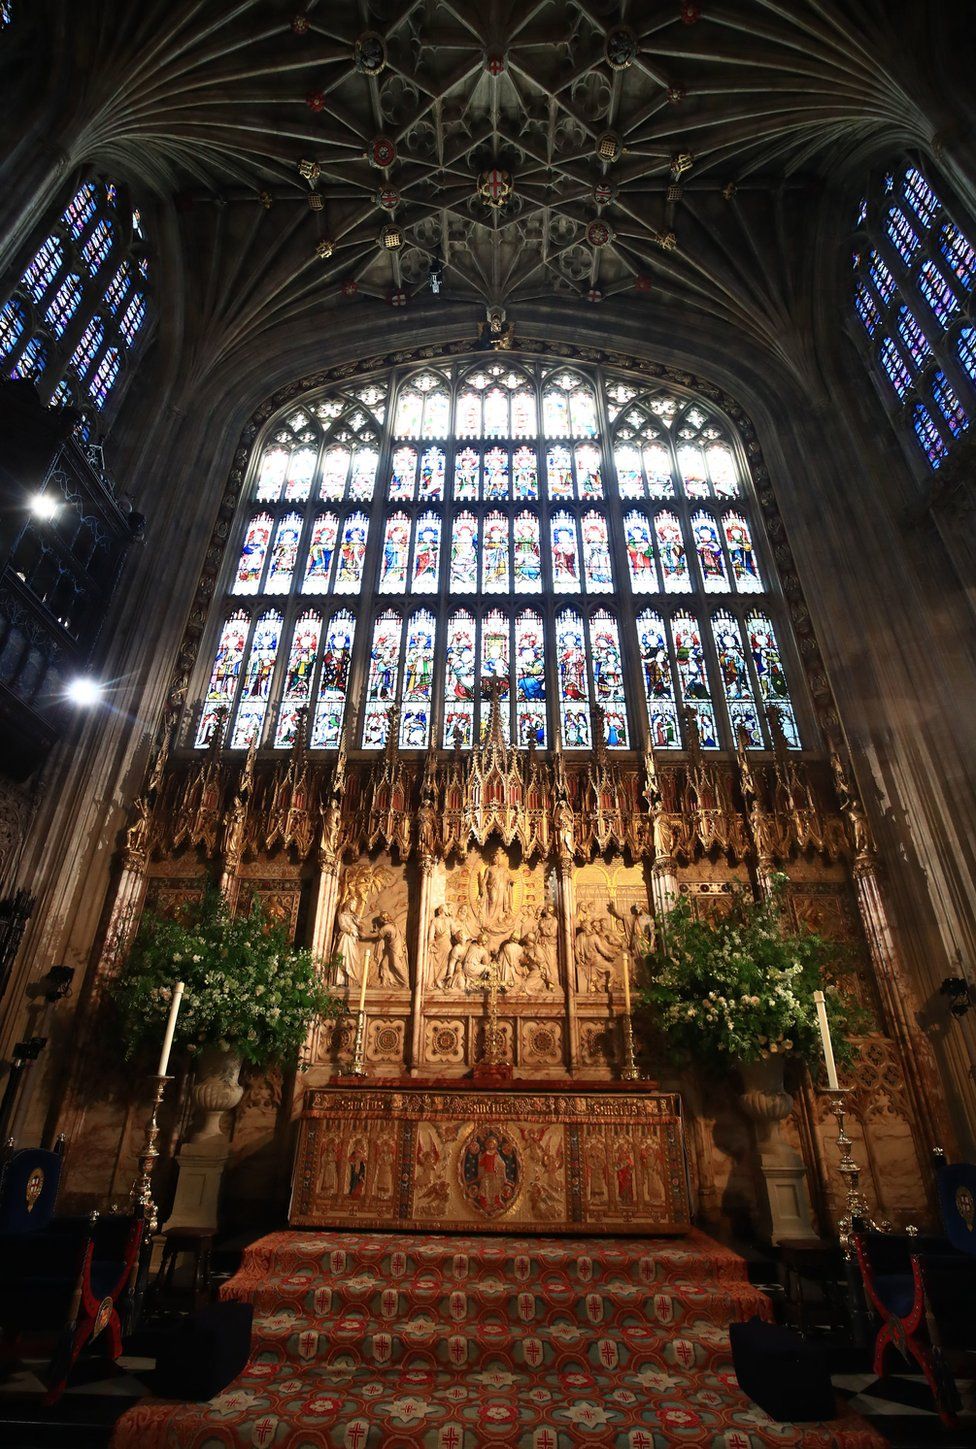 Flowers and foliage surround the High Altar of St George's Chapel at Windsor Castle for the wedding of Prince Harry to Meghan Markle.